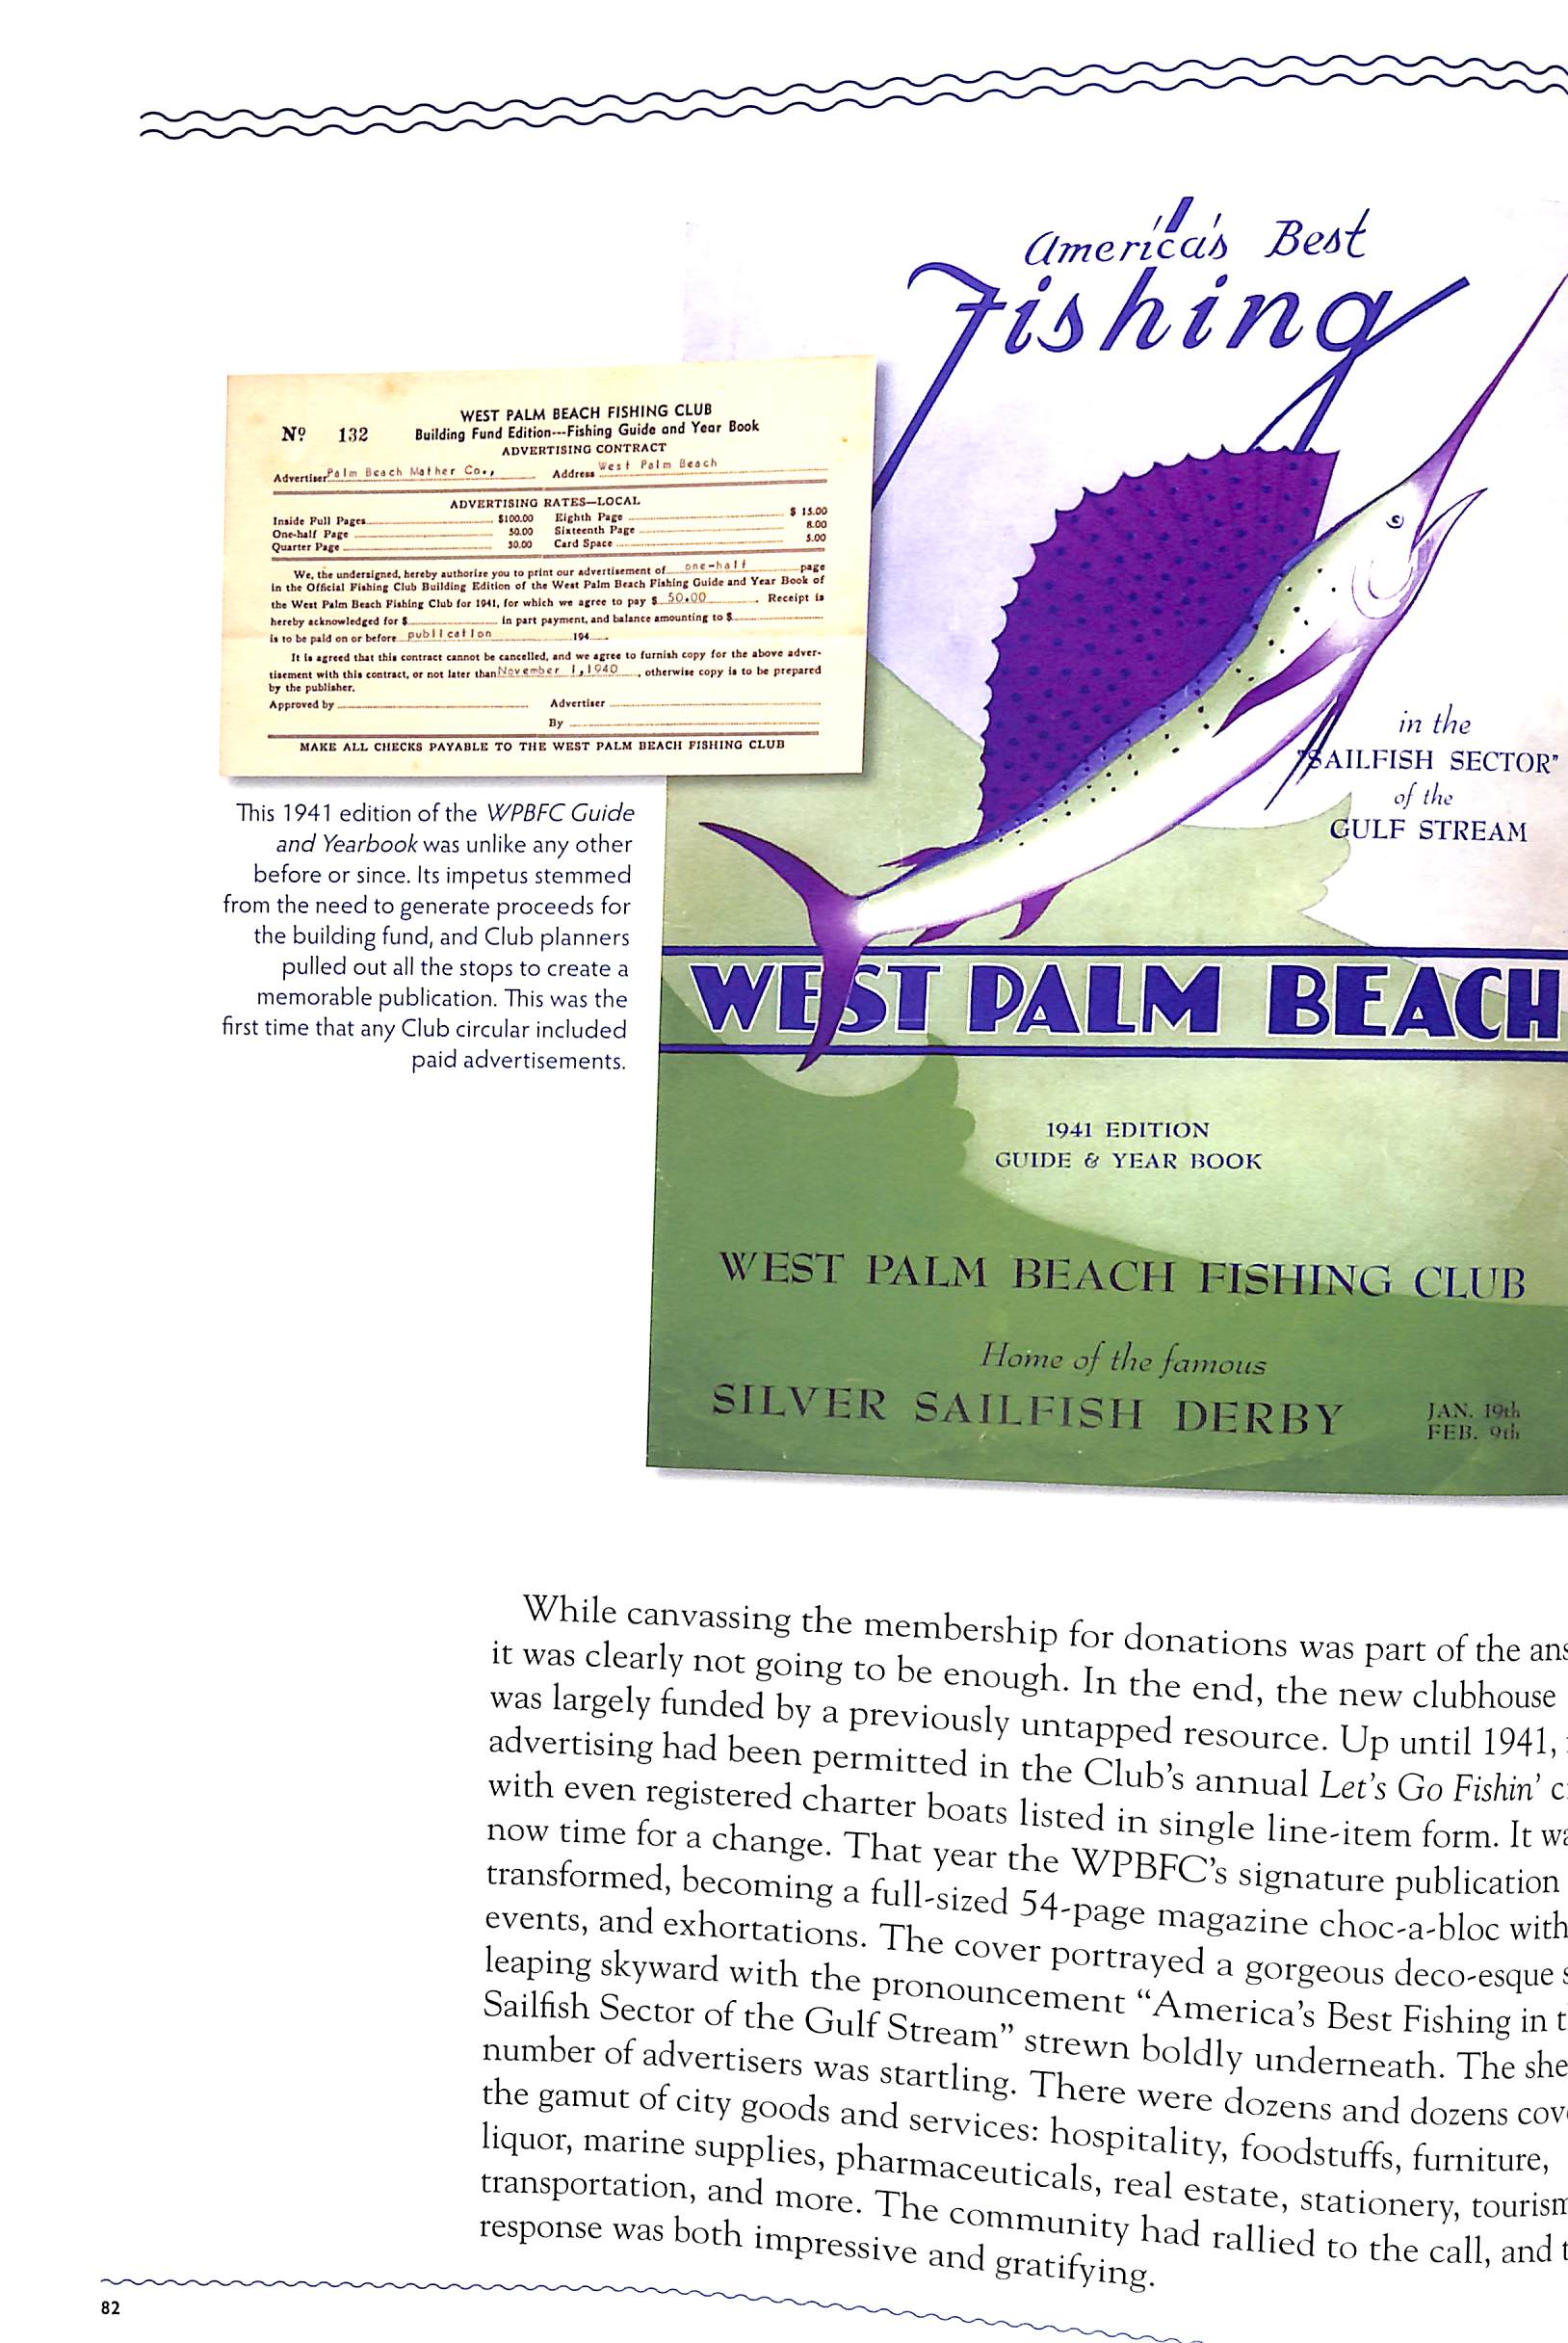 The West Palm Beach Fishing Club by Mike Rivkin | The Cary Collection